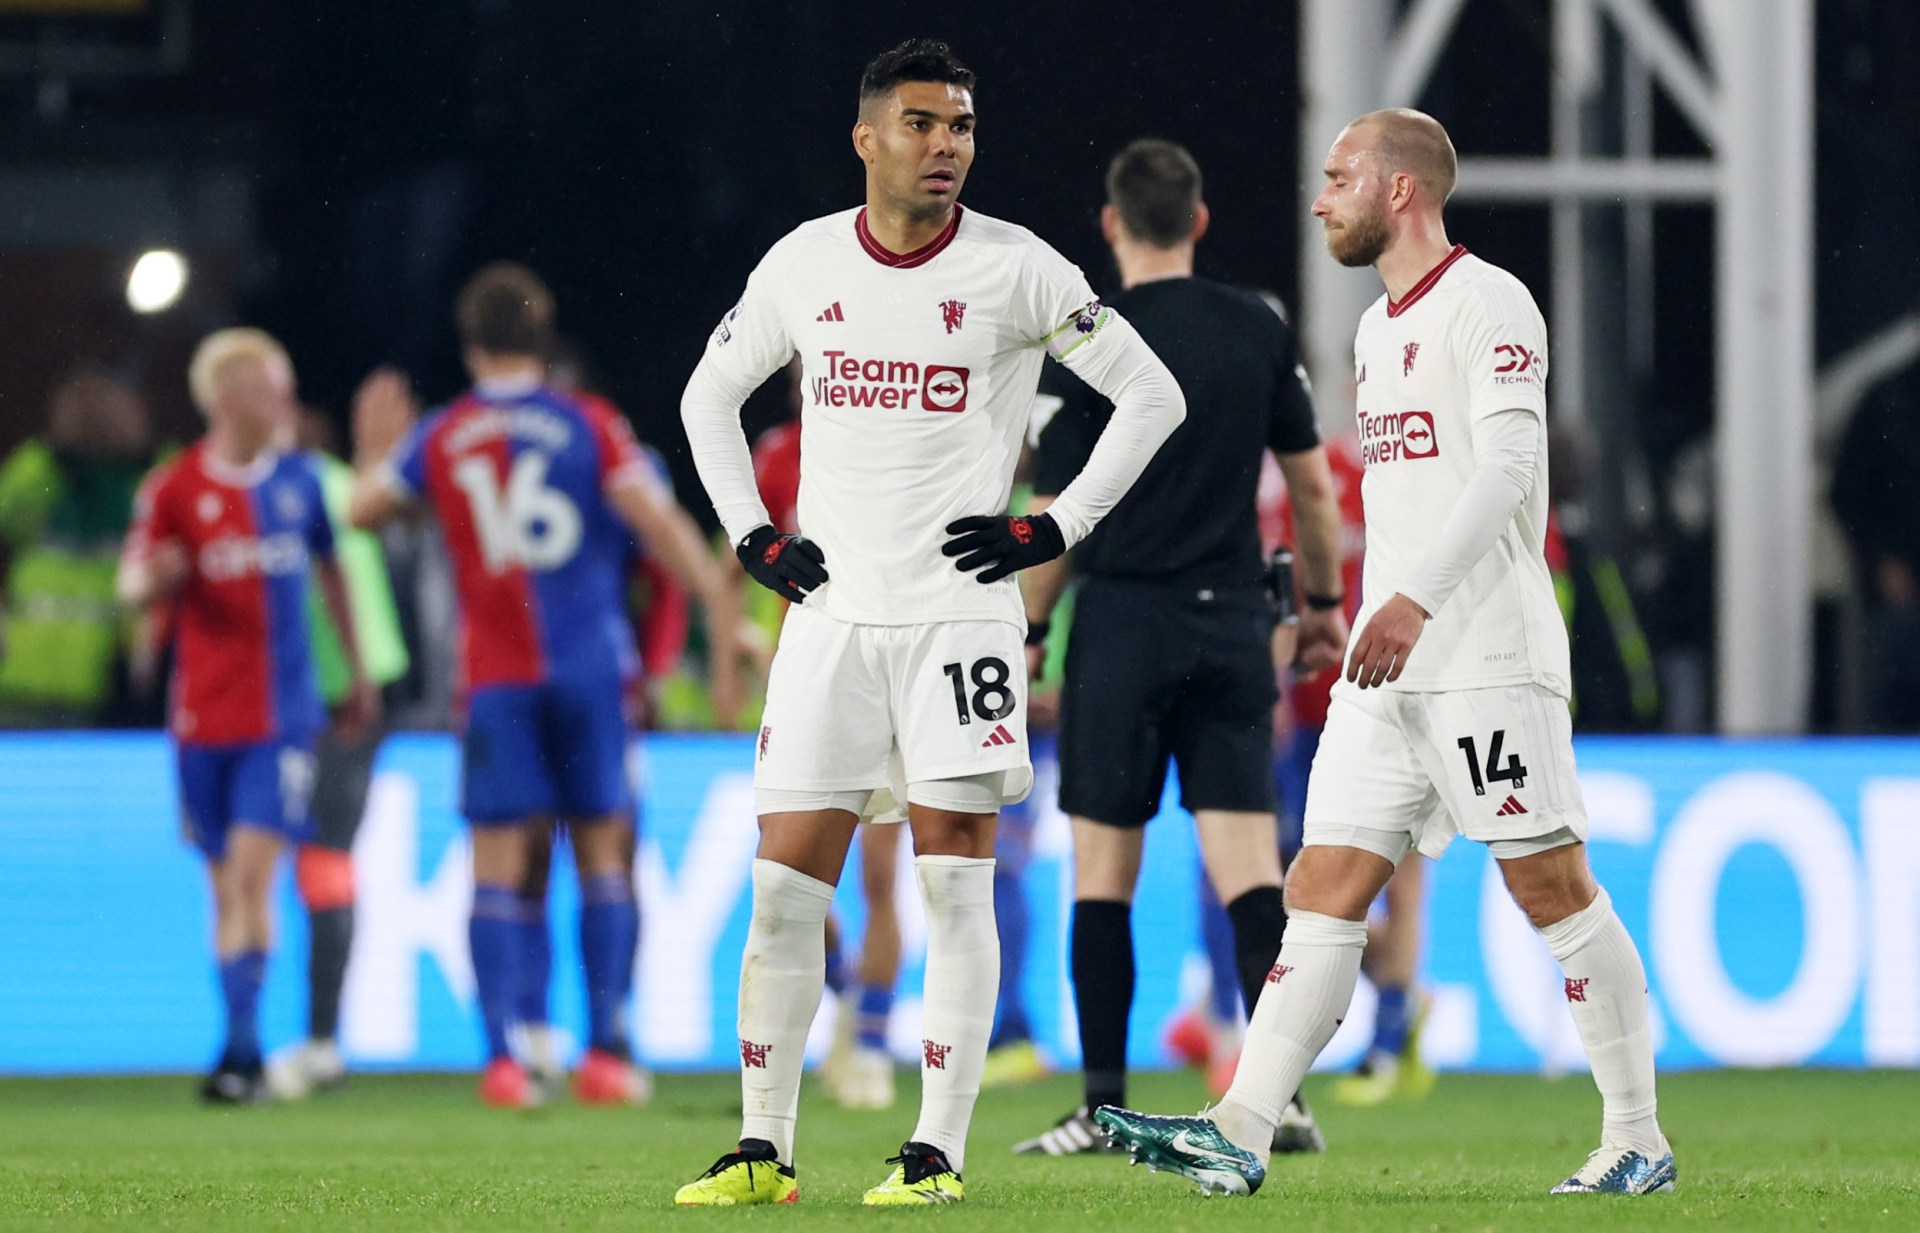 jamie carragher tells man utd star to 'call it a day and move' after crystal palace defeat